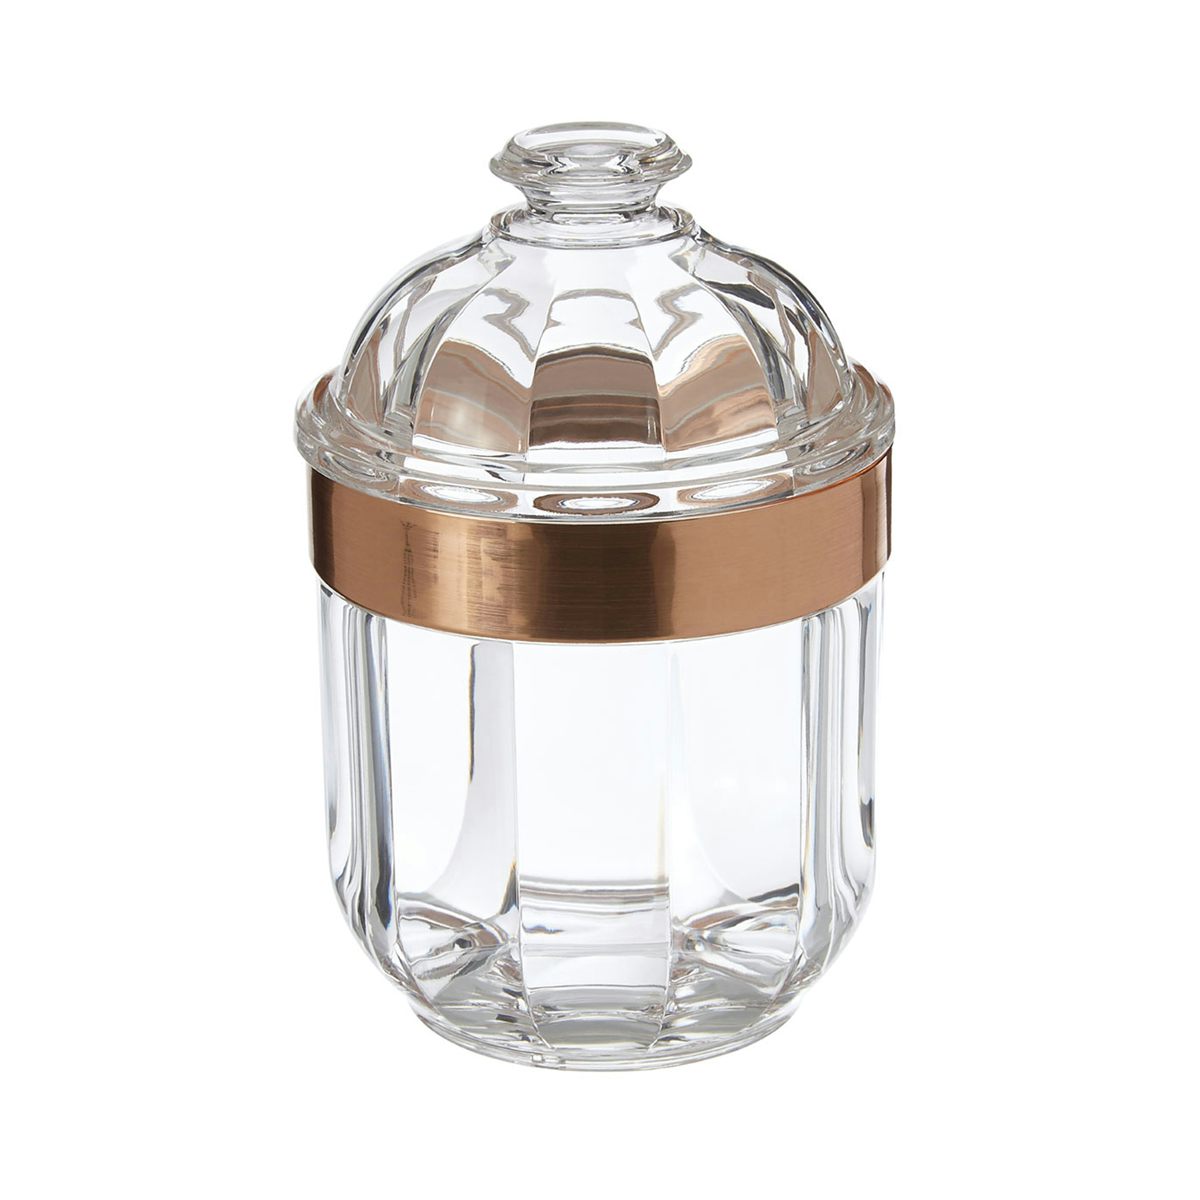 Accents Rose gold small acrylic storage jar